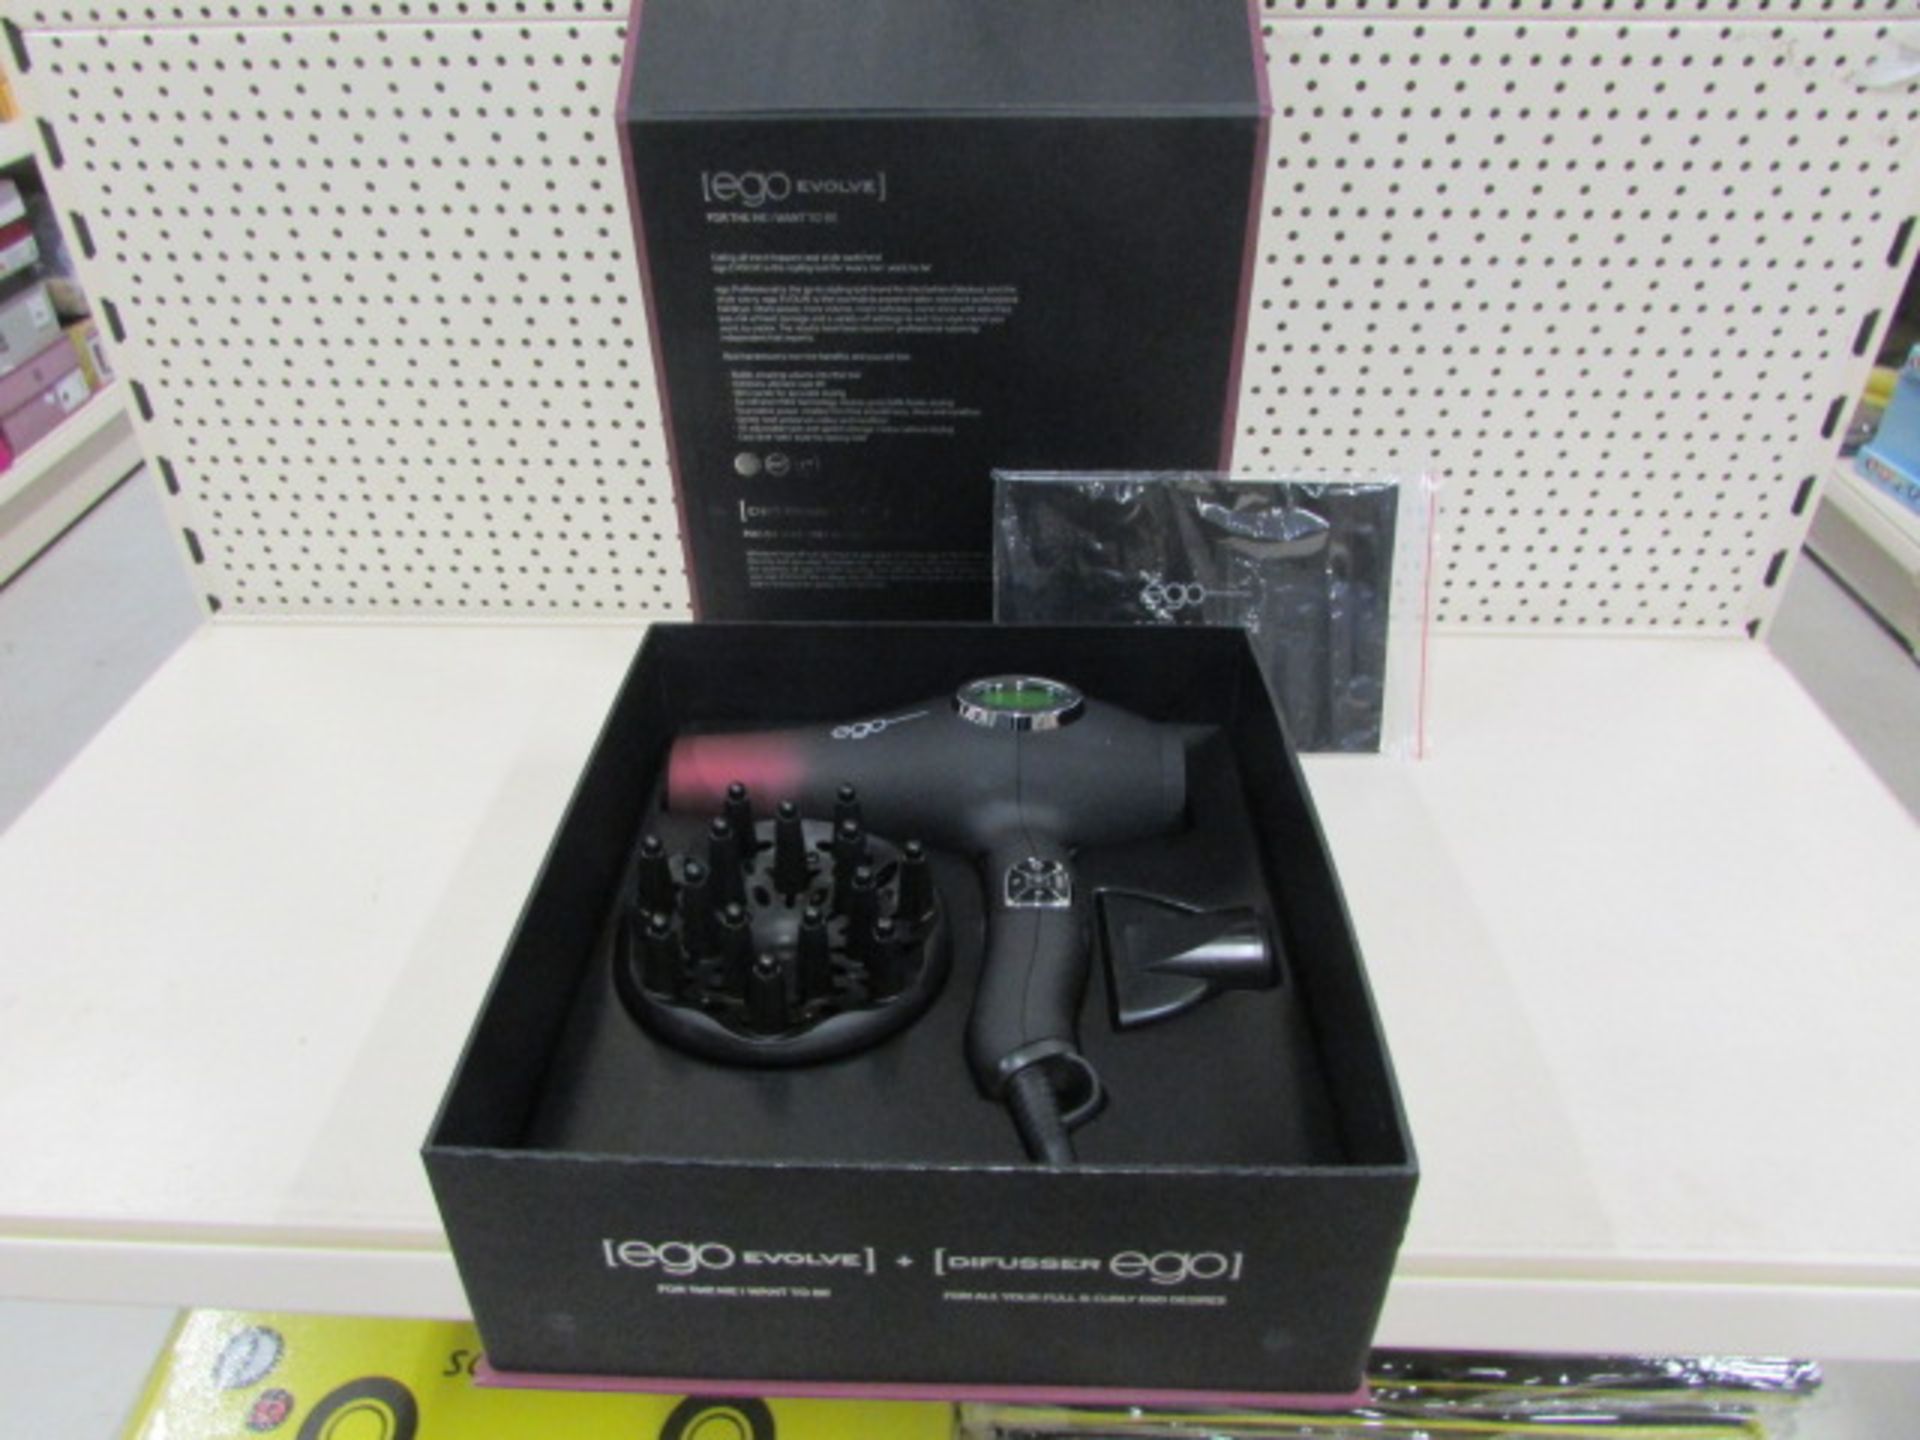 10 X Ego Professional Ego Evolve Hairdryer + Difusser [Brand New] - Image 5 of 6